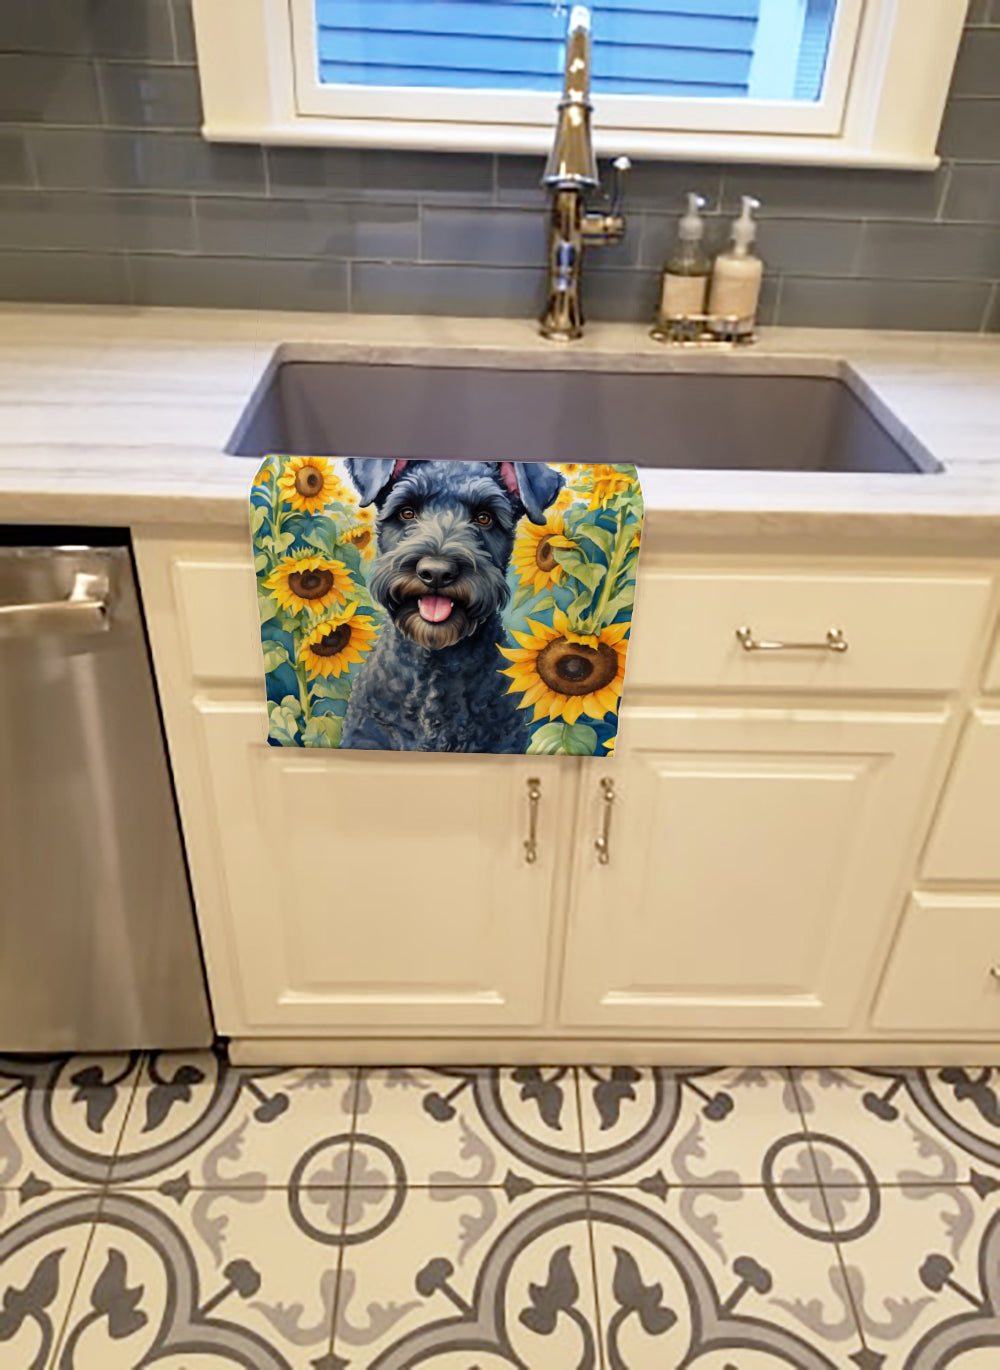 Buy this Kerry Blue Terrier in Sunflowers Kitchen Towel